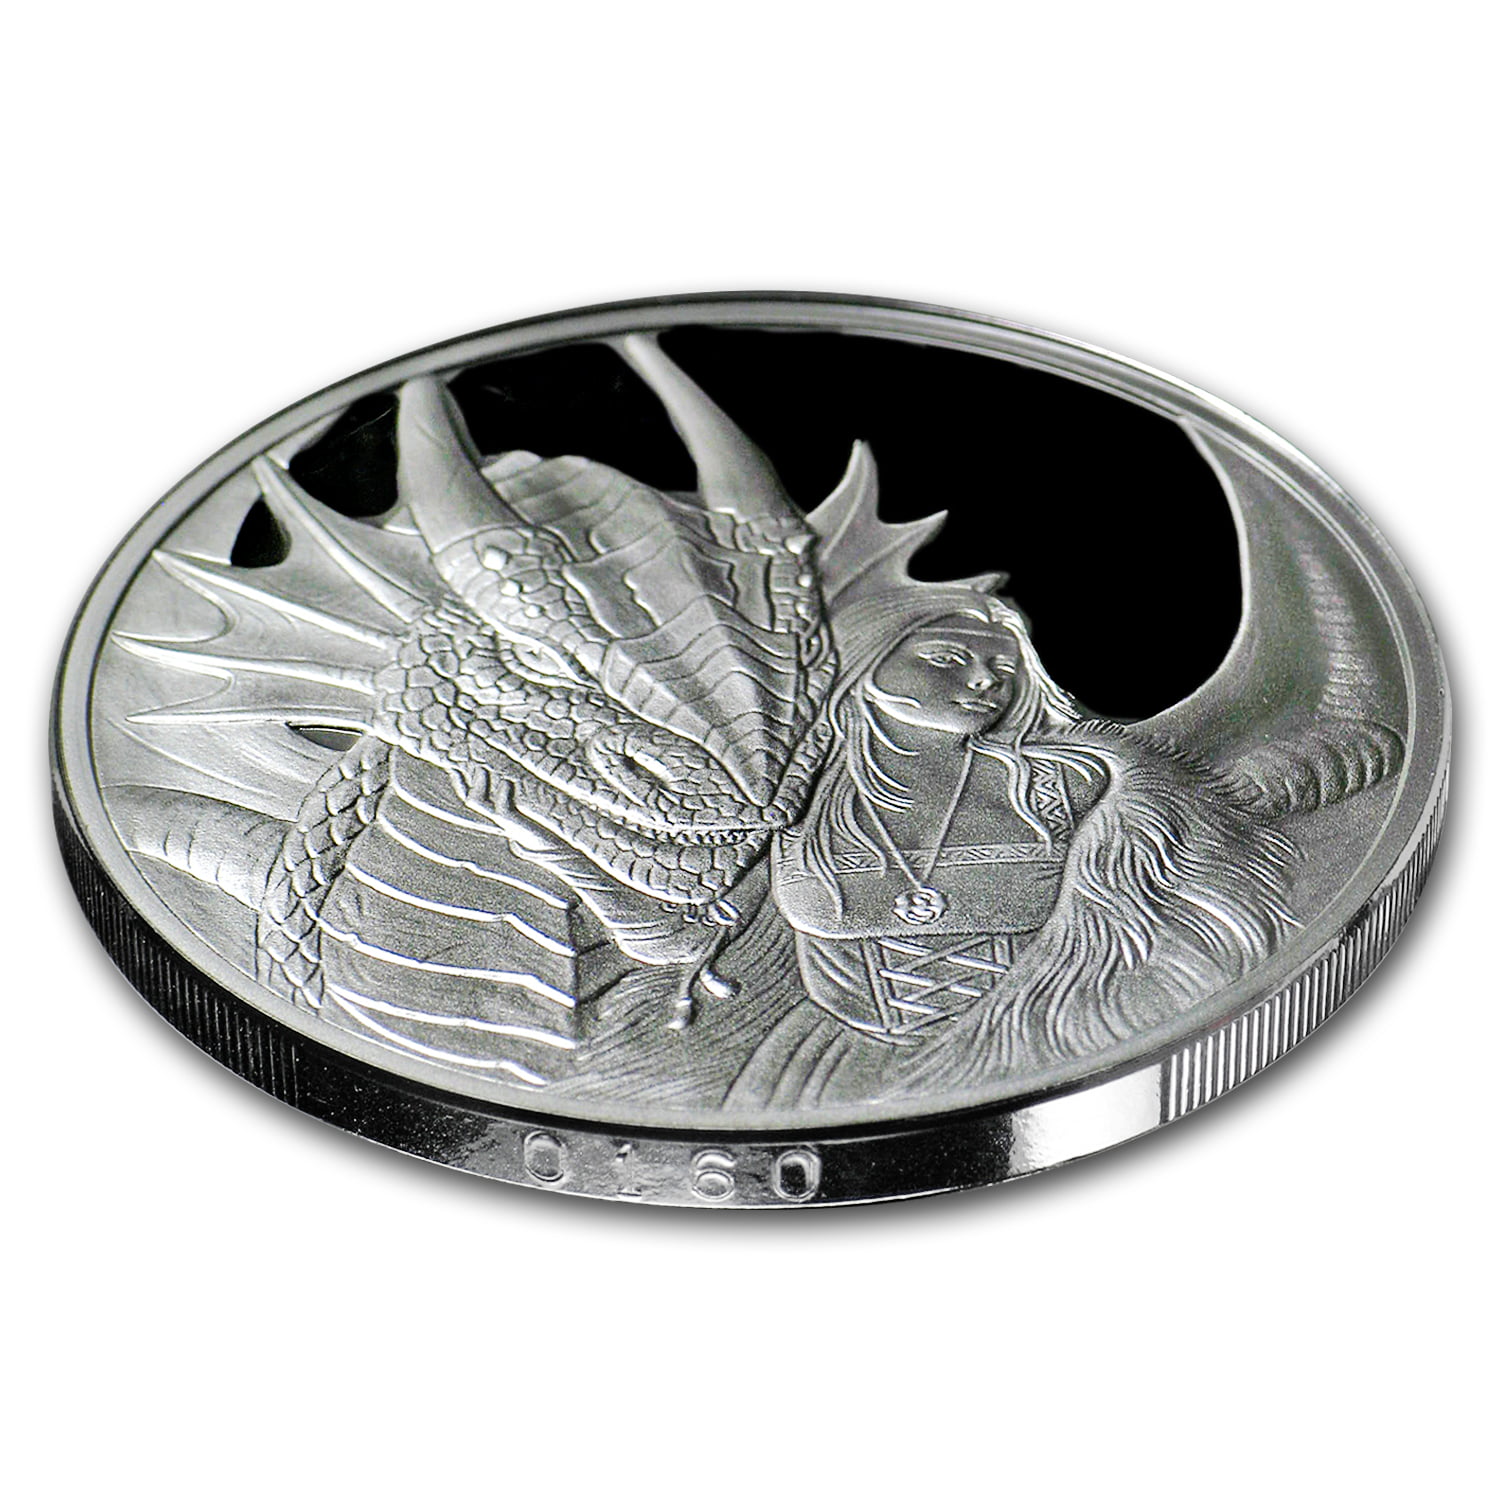 Anne Stokes Dragons Series Friend Or Foe 1 oz Silver Proof Capsuled Round W/COA